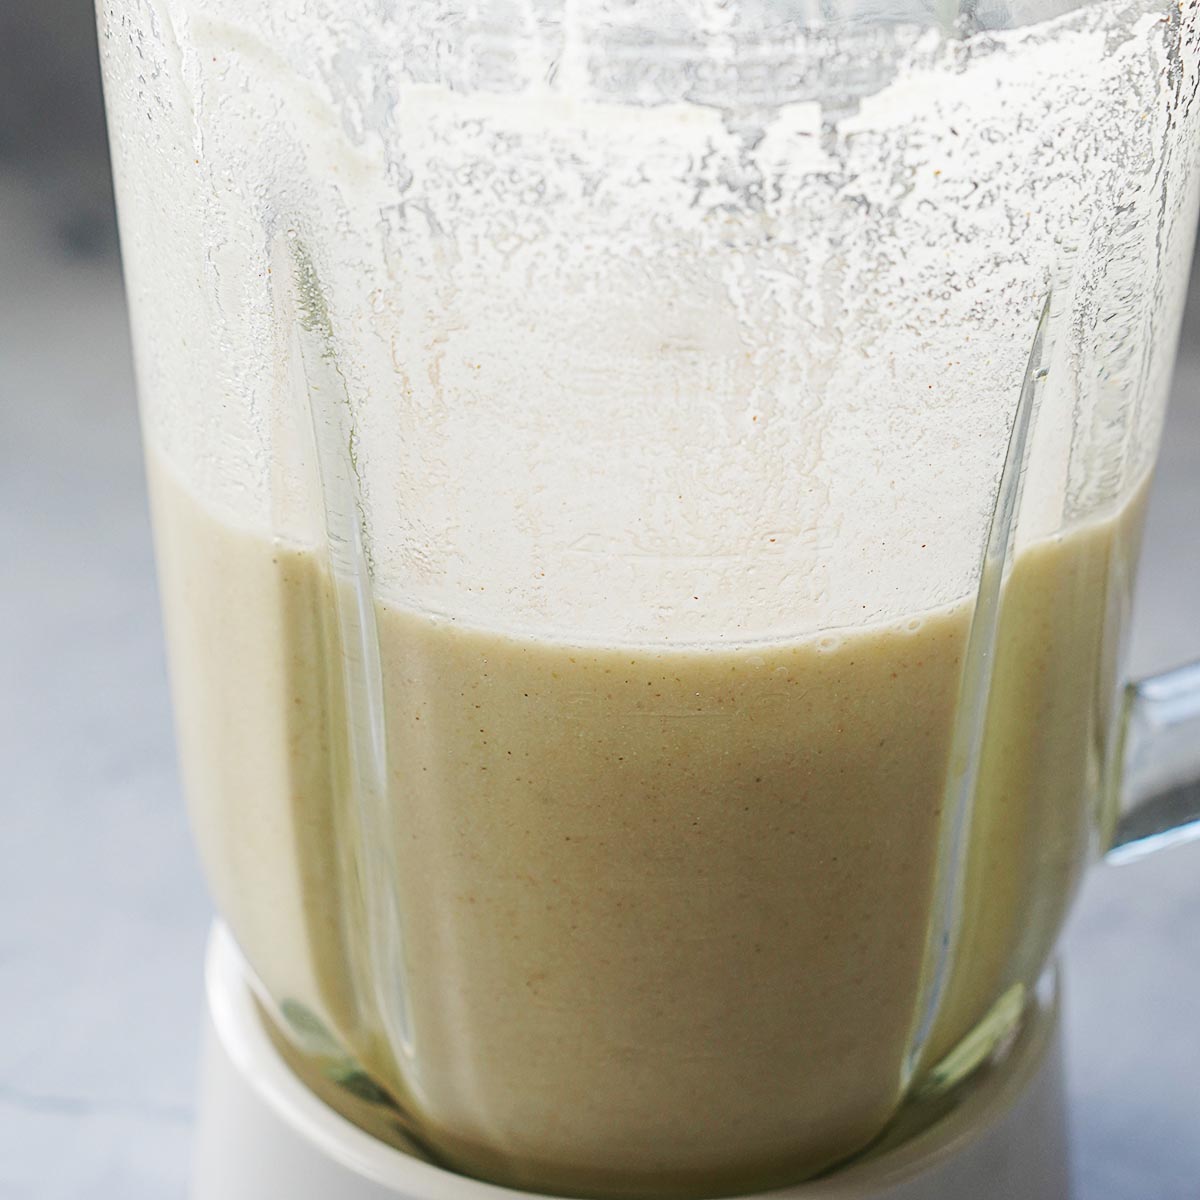 A blender with blended masa in water.